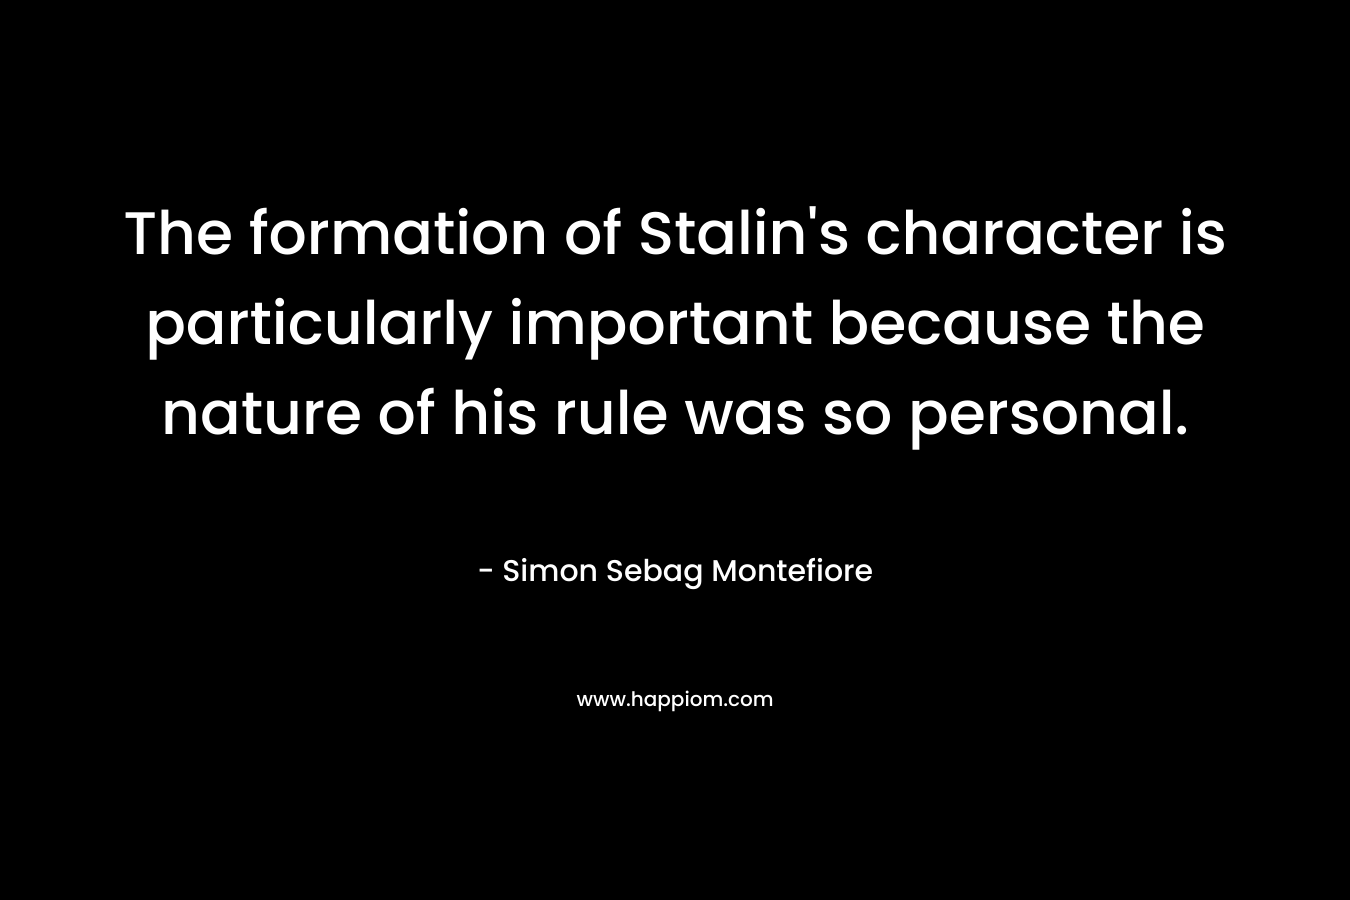 The formation of Stalin's character is particularly important because the nature of his rule was so personal.